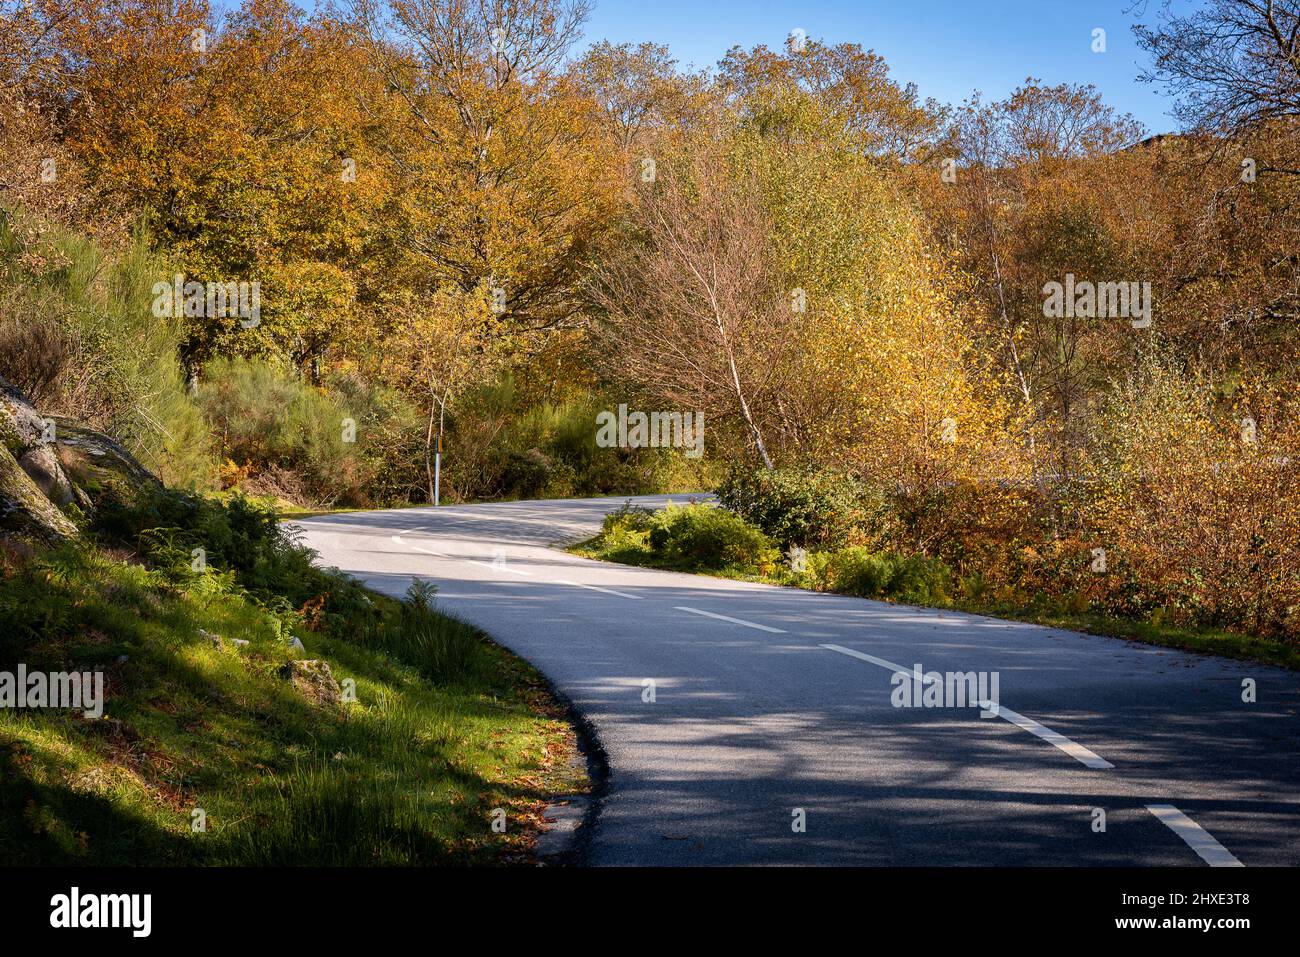 Road with curves on an autumn fall landscape Stock Photo